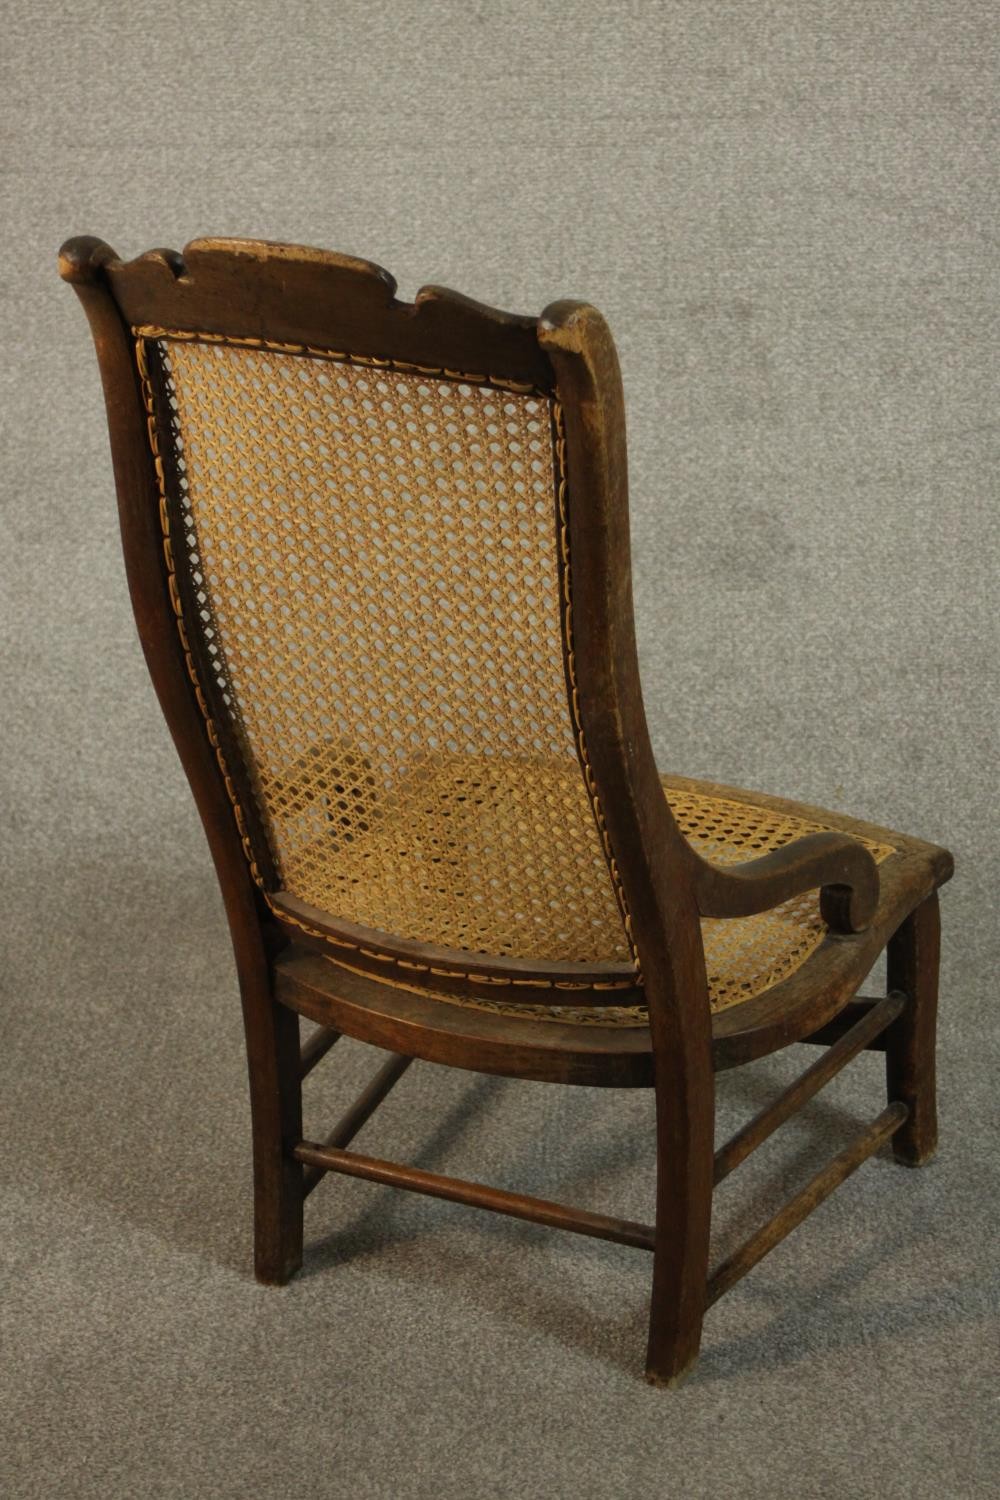 A circa 1900 hardwood nursing chair, with a caned seat and back, the legs joined by stretchers. - Image 5 of 7